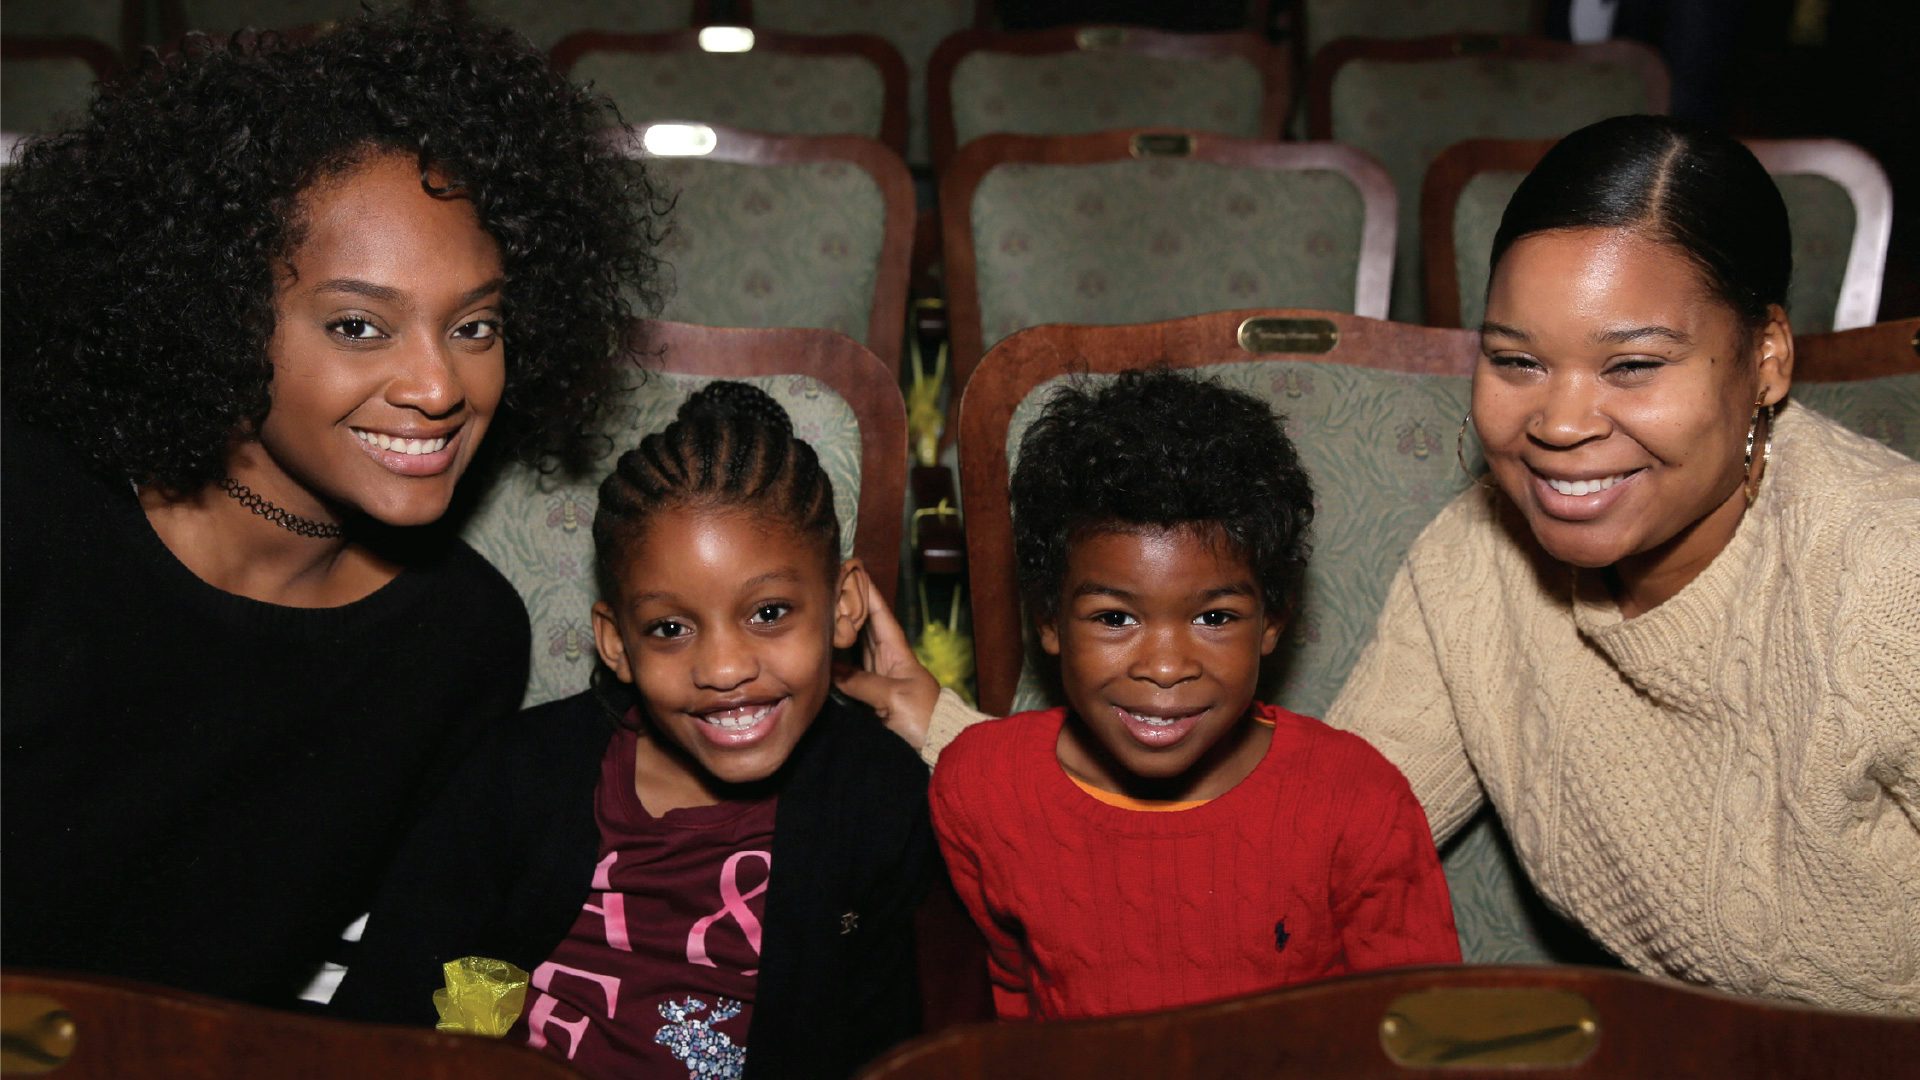 Two women and two kids sitting in theater seats and smiling